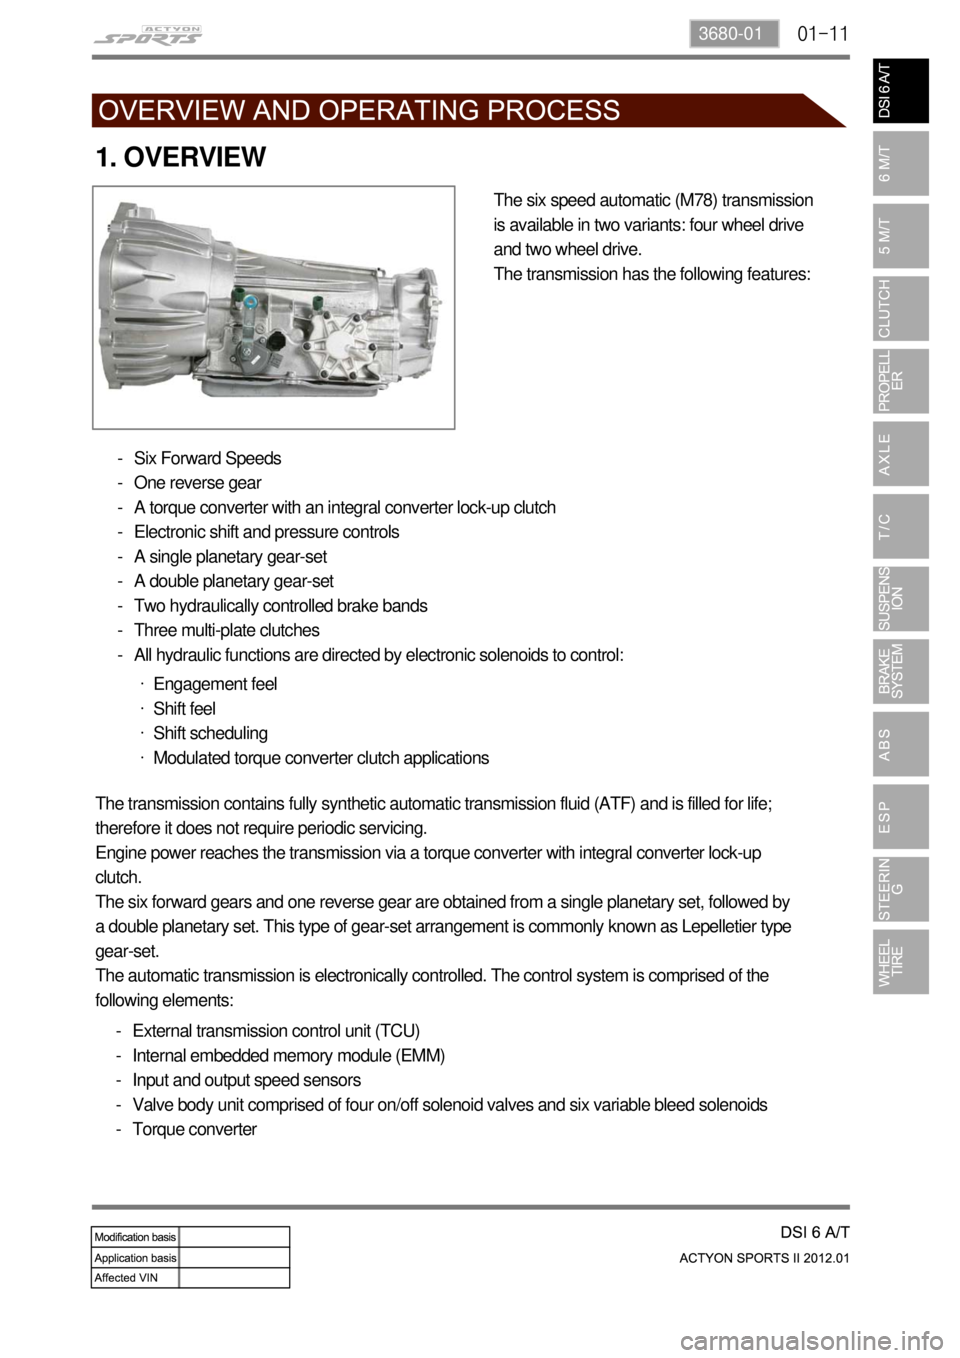 SSANGYONG NEW ACTYON SPORTS 2012  Service Manual 01-113680-01
1. OVERVIEW
The six speed automatic (M78) transmission 
is available in two variants: four wheel drive 
and two wheel drive.
The transmission has the following features:
Six Forward Speed